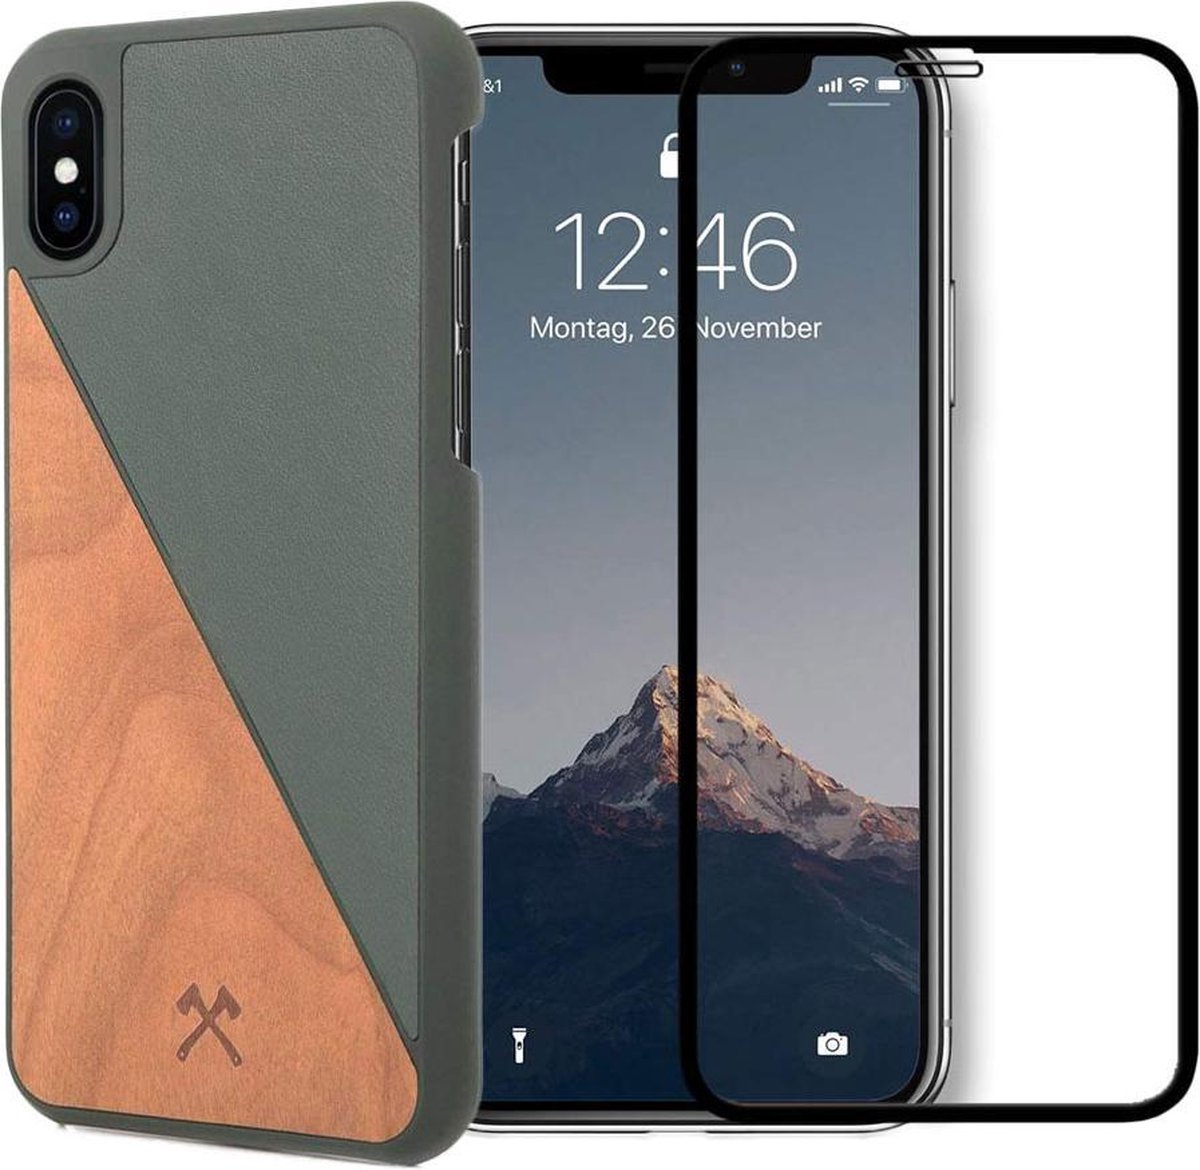 iPhone Xs Max hoesje - Woodcessories - Groen - Hout